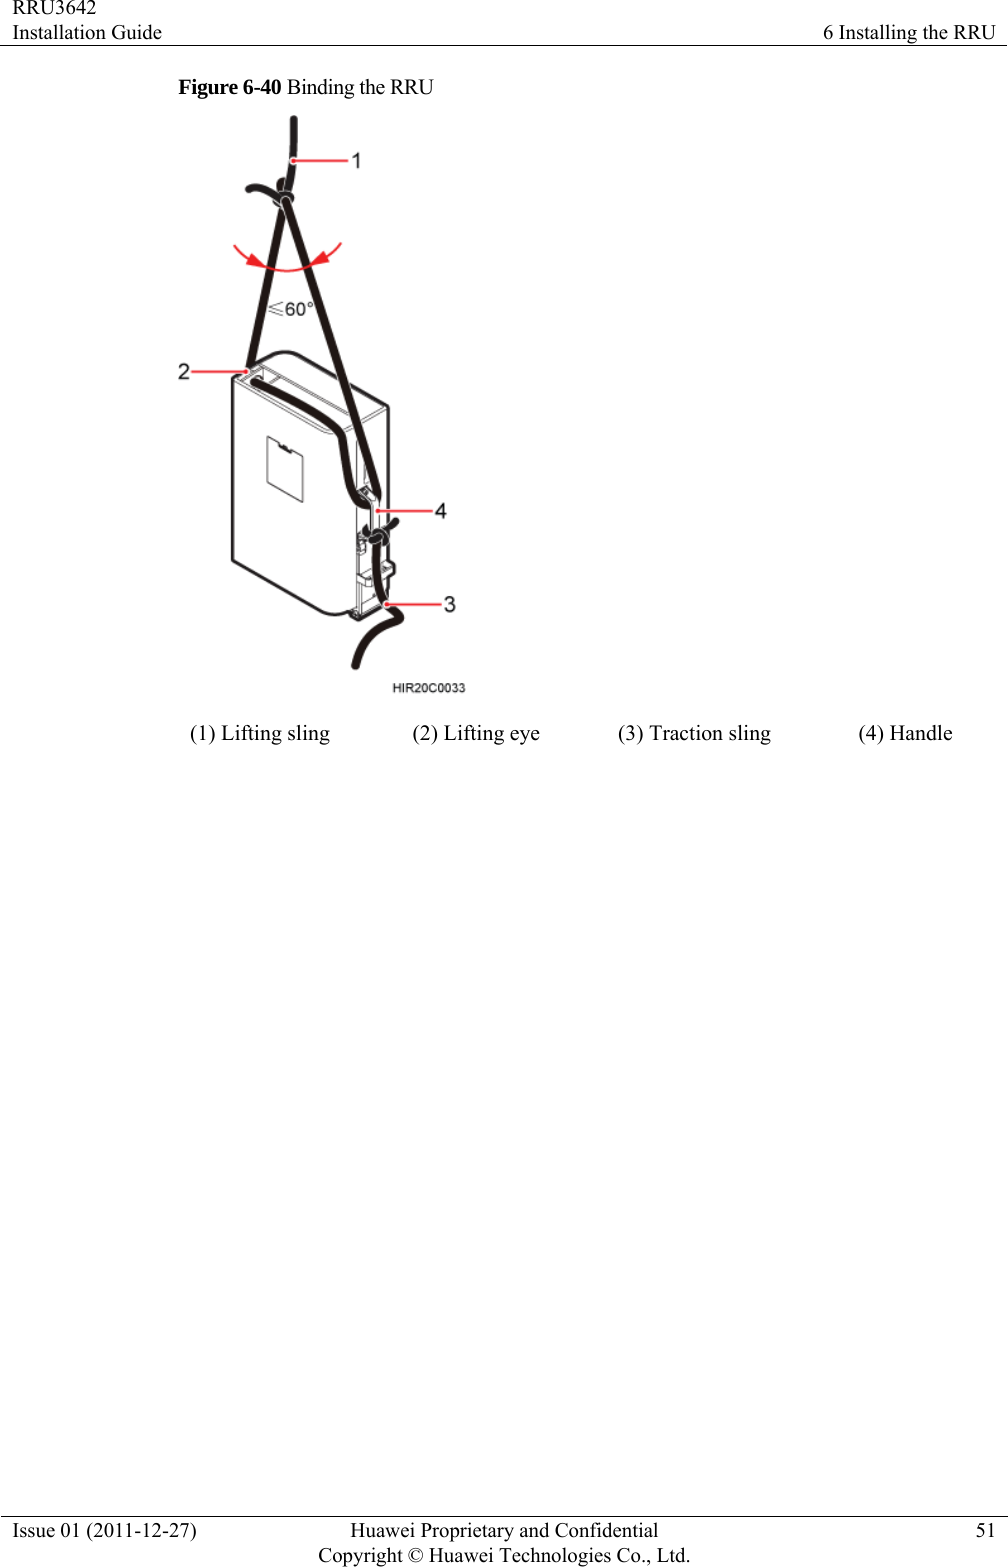 RRU3642 Installation Guide  6 Installing the RRU Issue 01 (2011-12-27)  Huawei Proprietary and Confidential         Copyright © Huawei Technologies Co., Ltd.51 Figure 6-40 Binding the RRU  (1) Lifting sling  (2) Lifting eye  (3) Traction sling  (4) Handle   